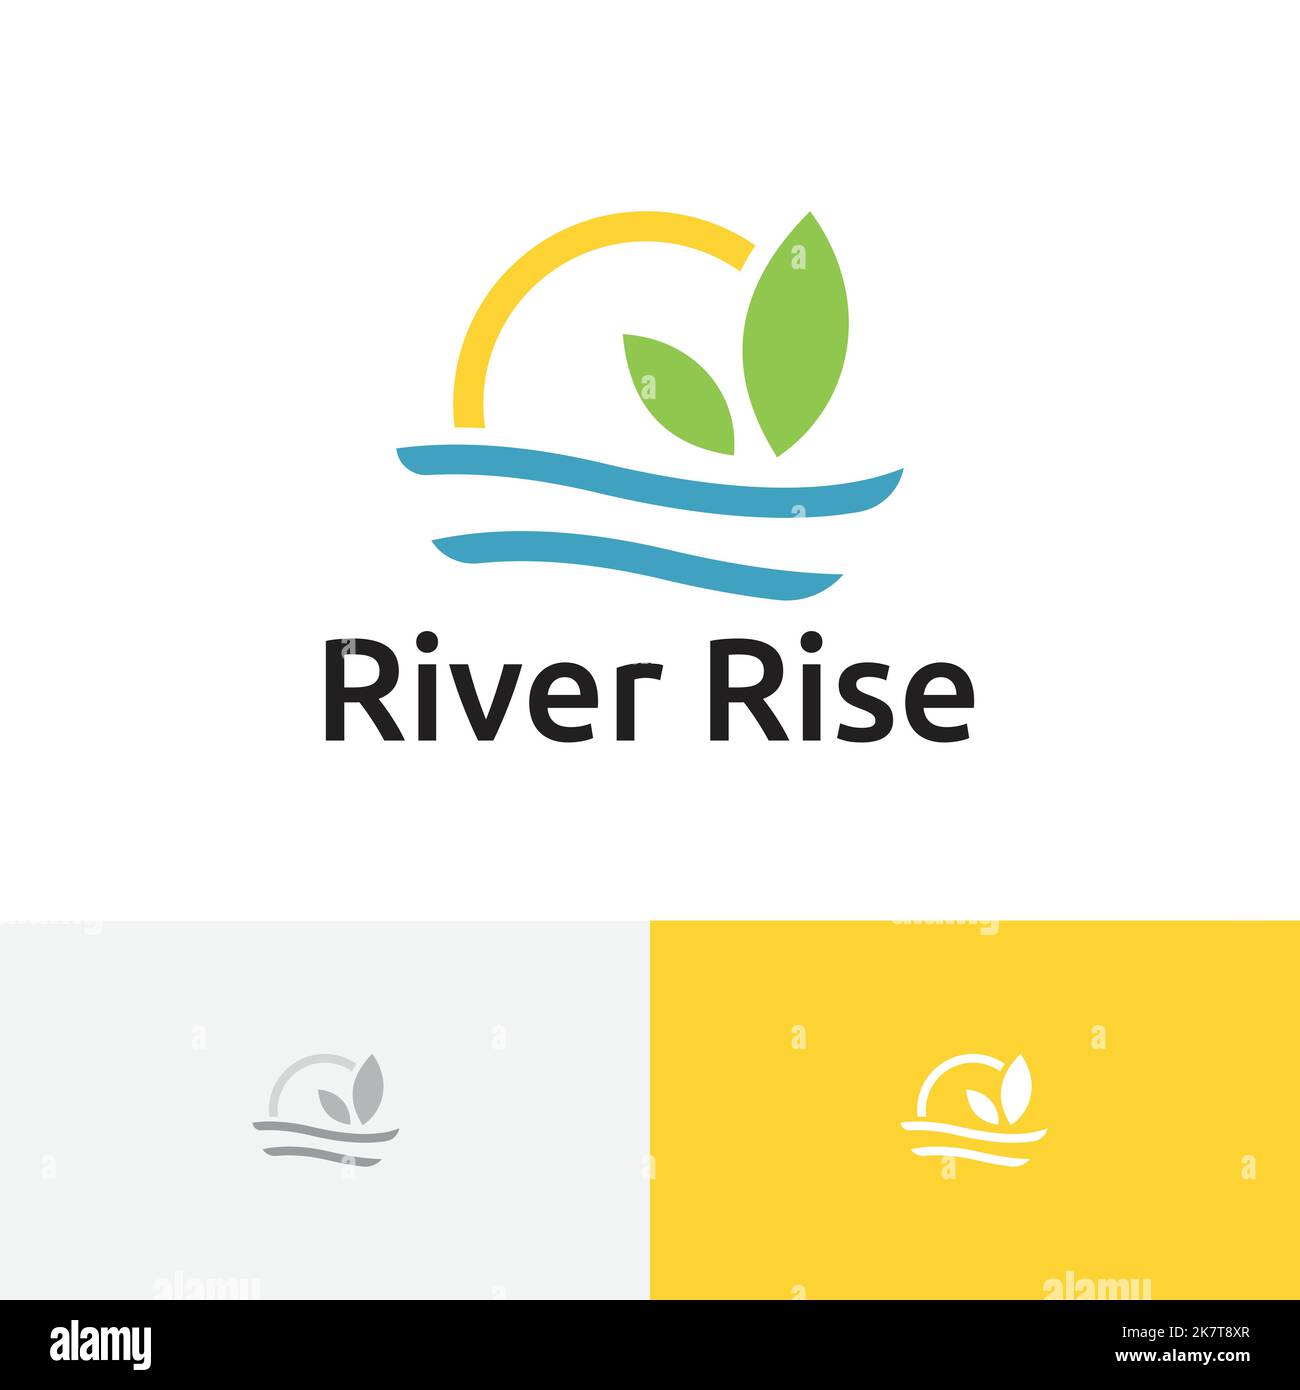 River Rise Morning Sun Leaf Eco Nature Simple Logo Stock Vector